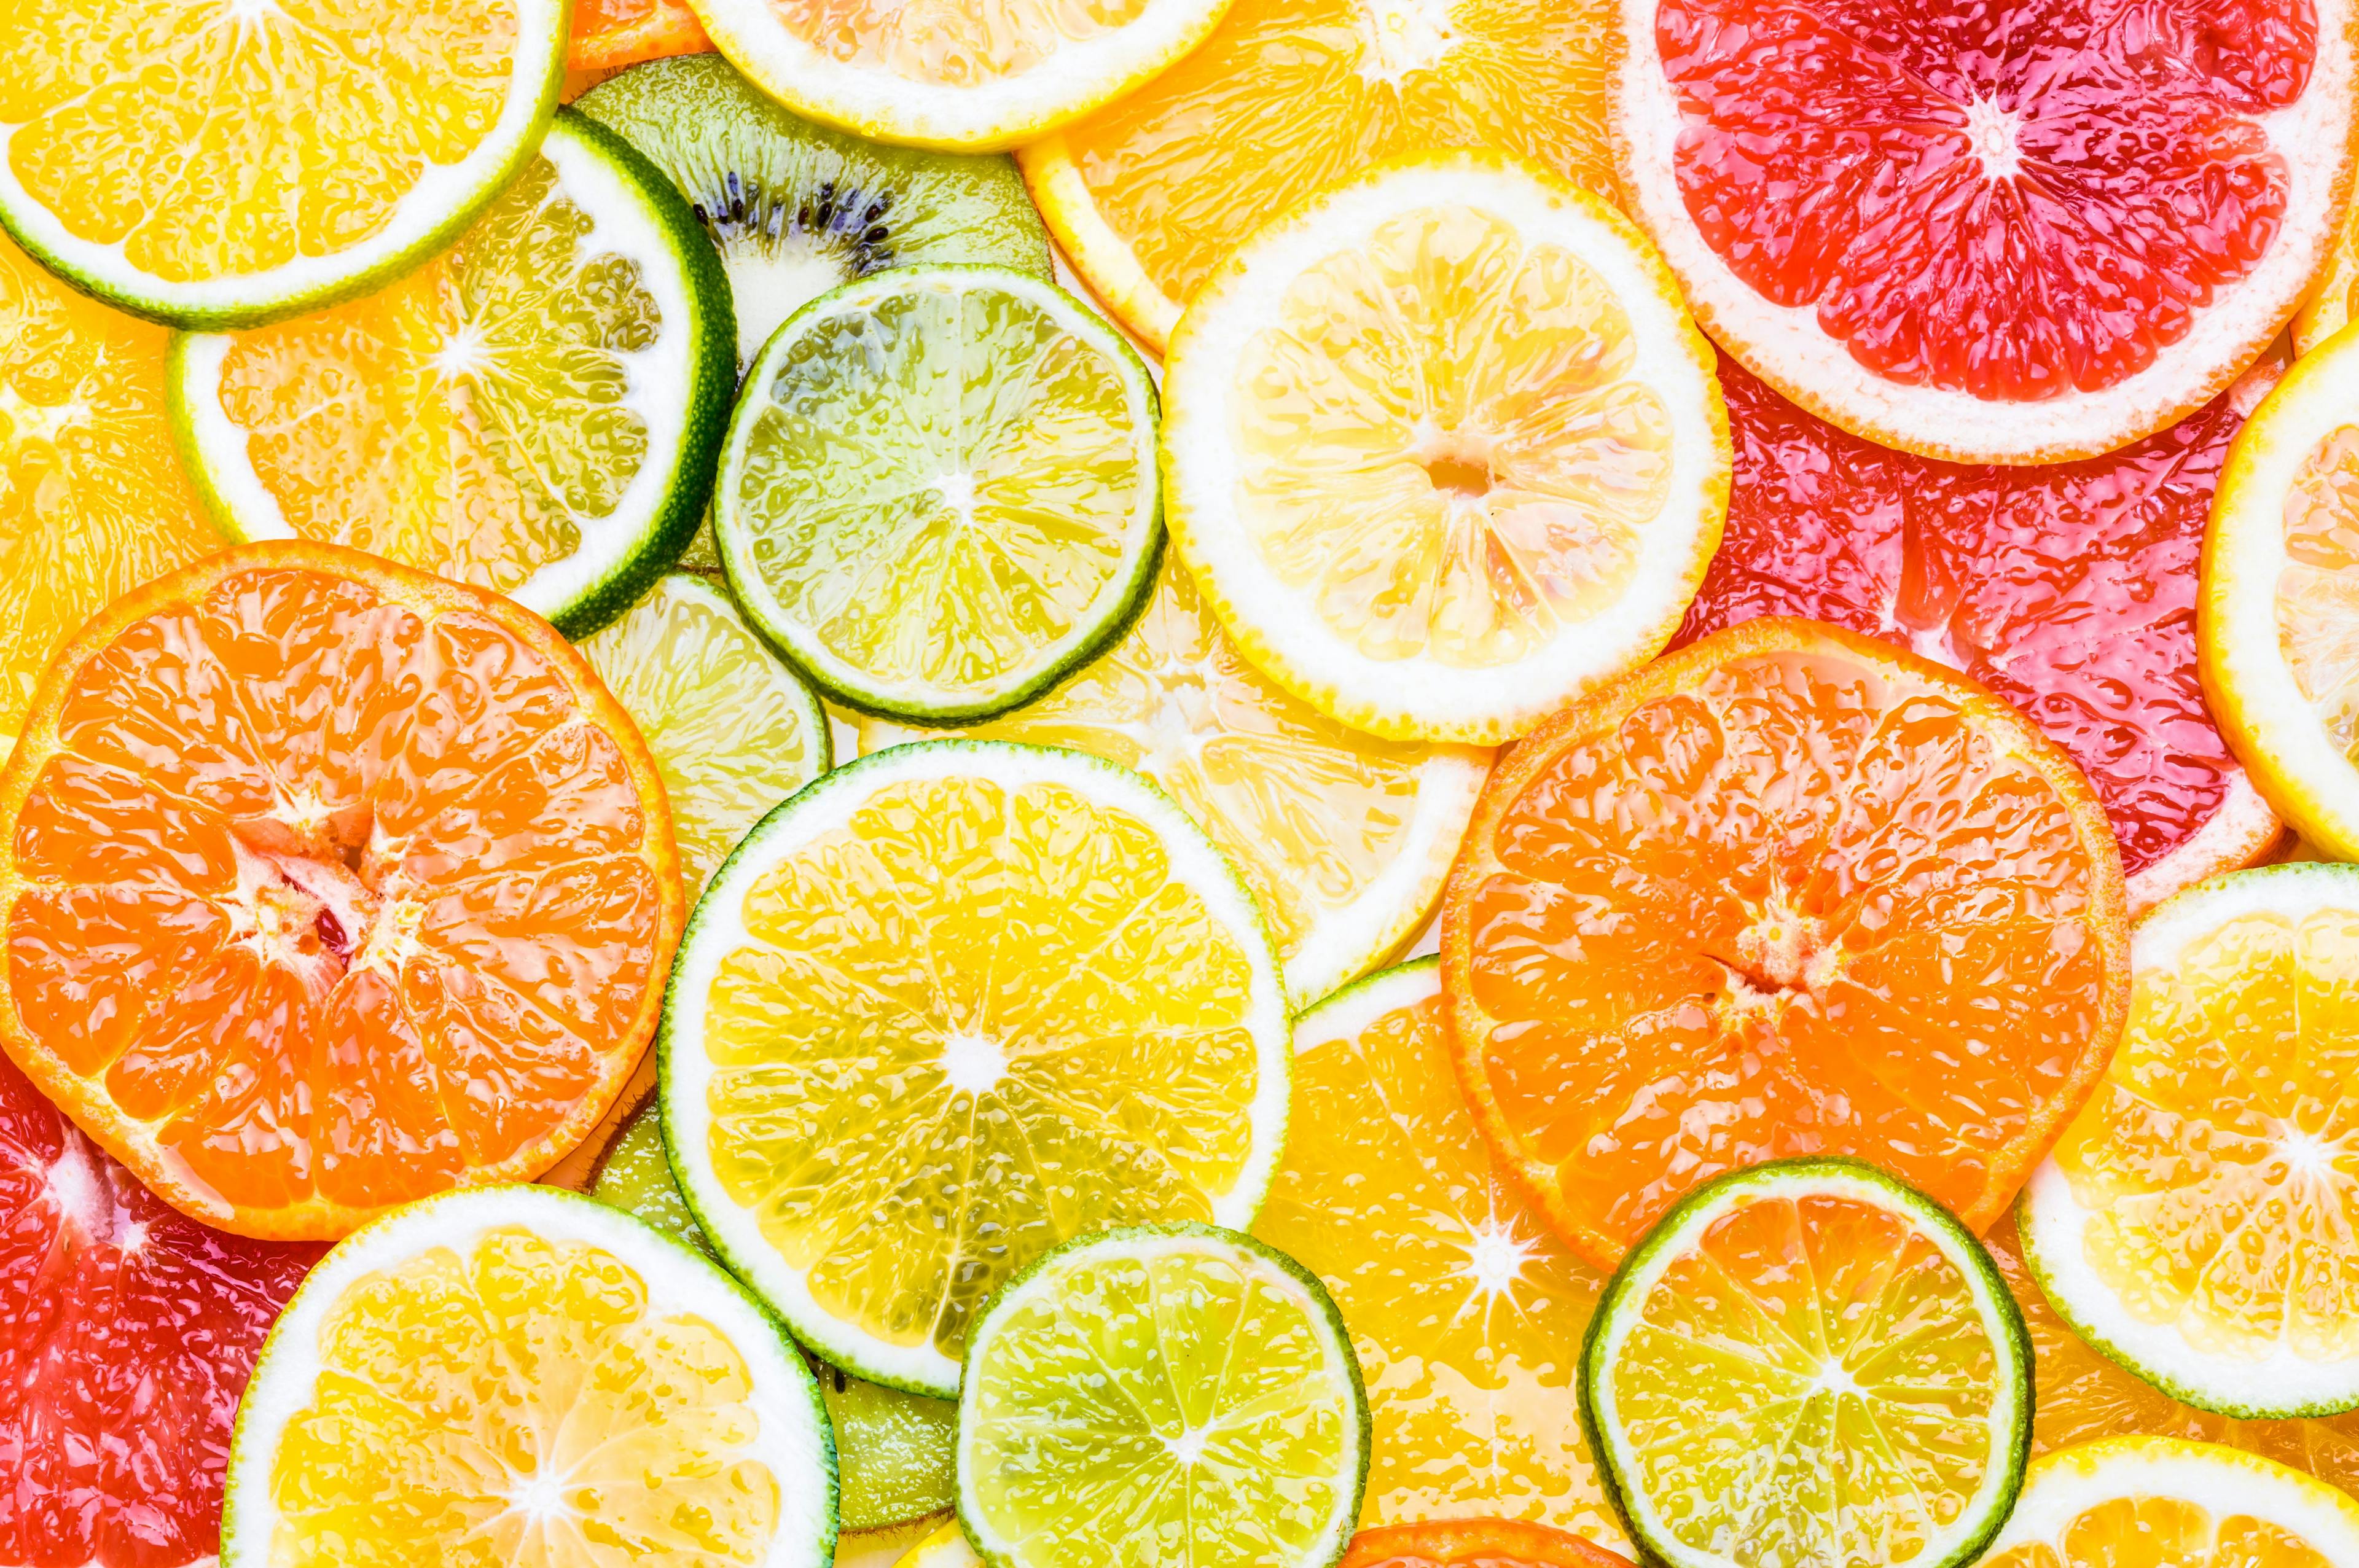 Citrus fruits background various slices top view background. Vitamin c fruits. | Image Credit: © travelbook - stock.adobe.com